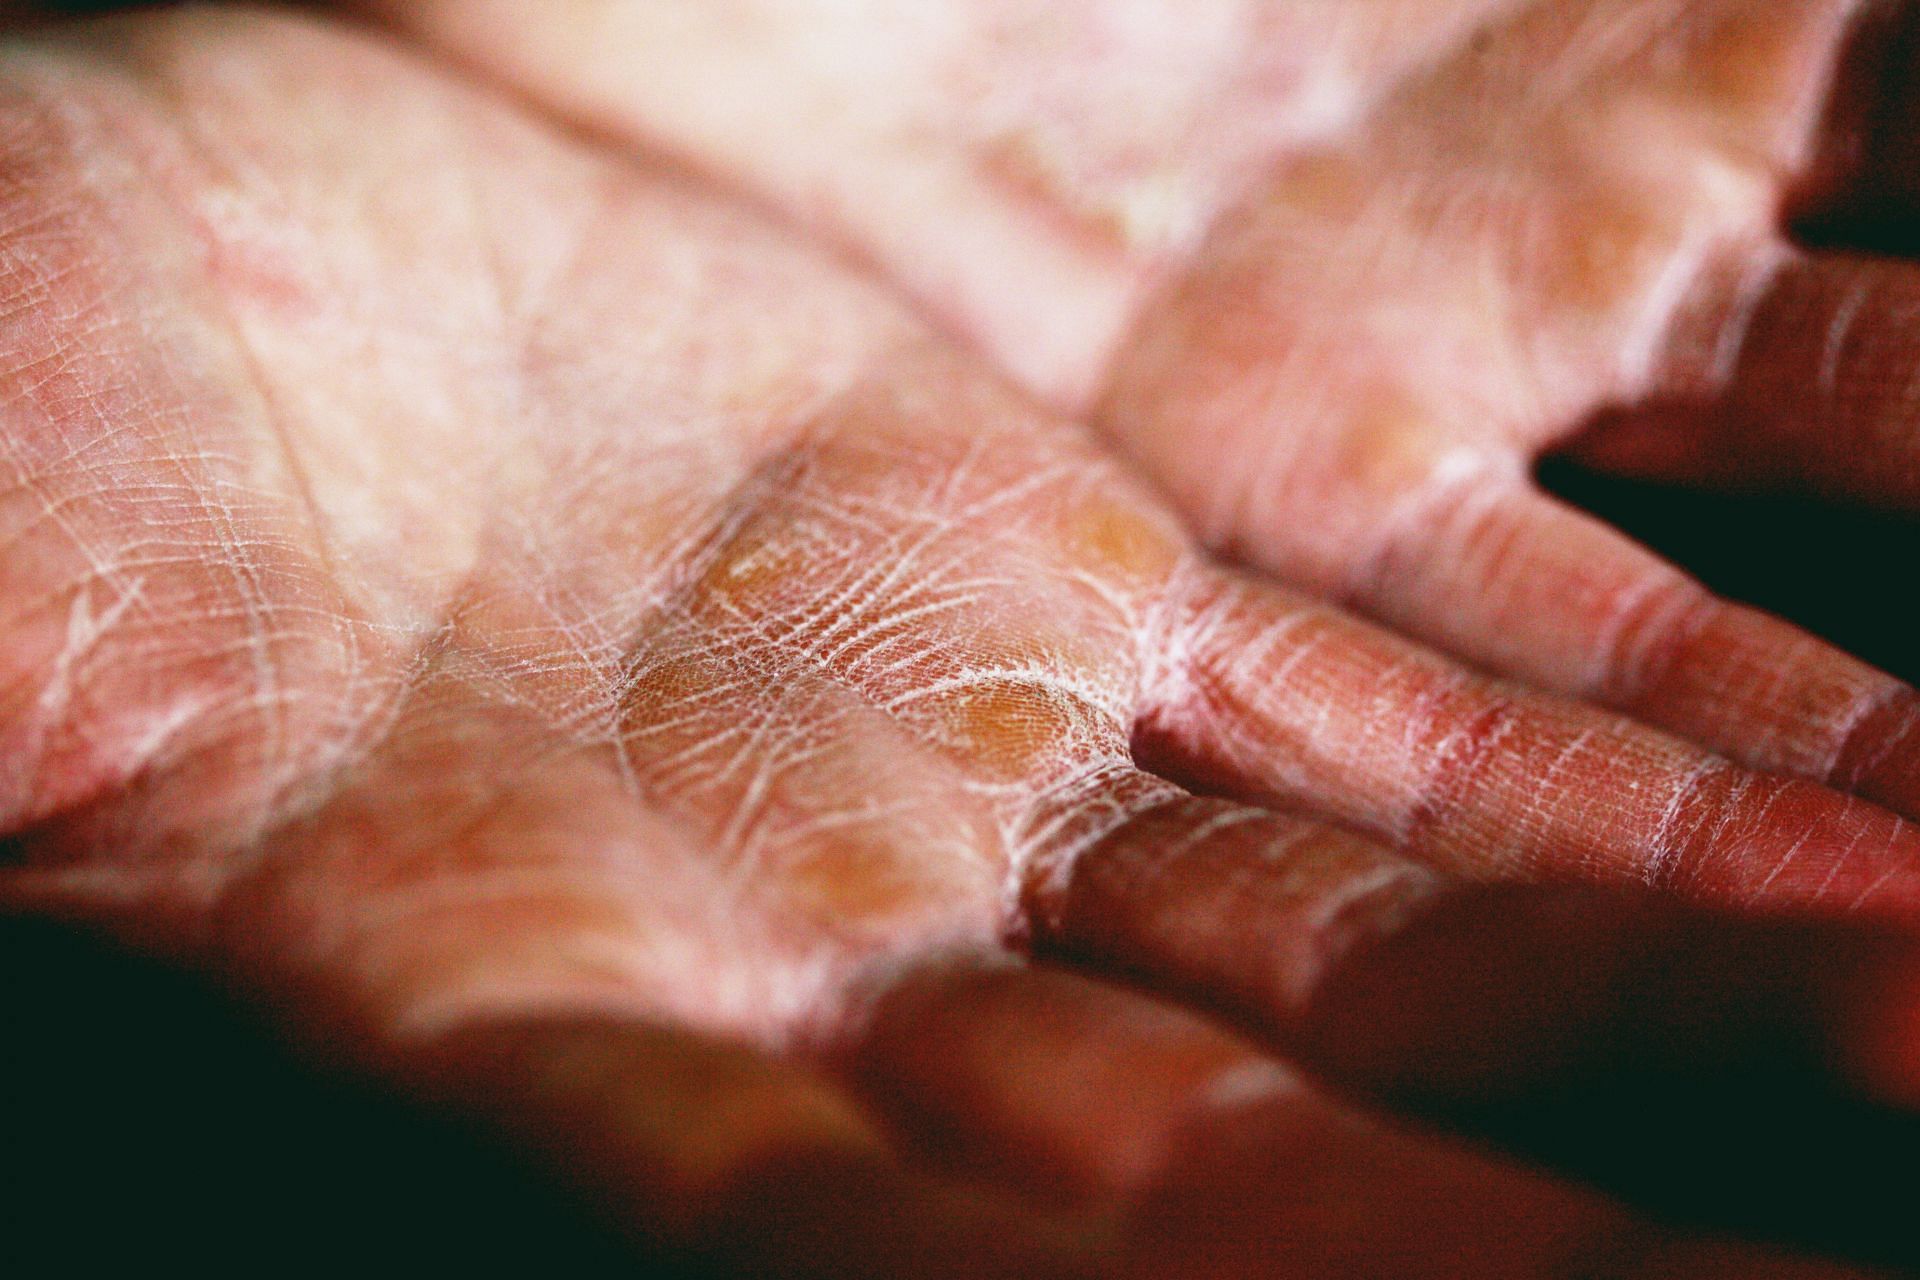 Dry skin can be an indicator of low iron in the body (Image via Unsplash @Alexander Grey)